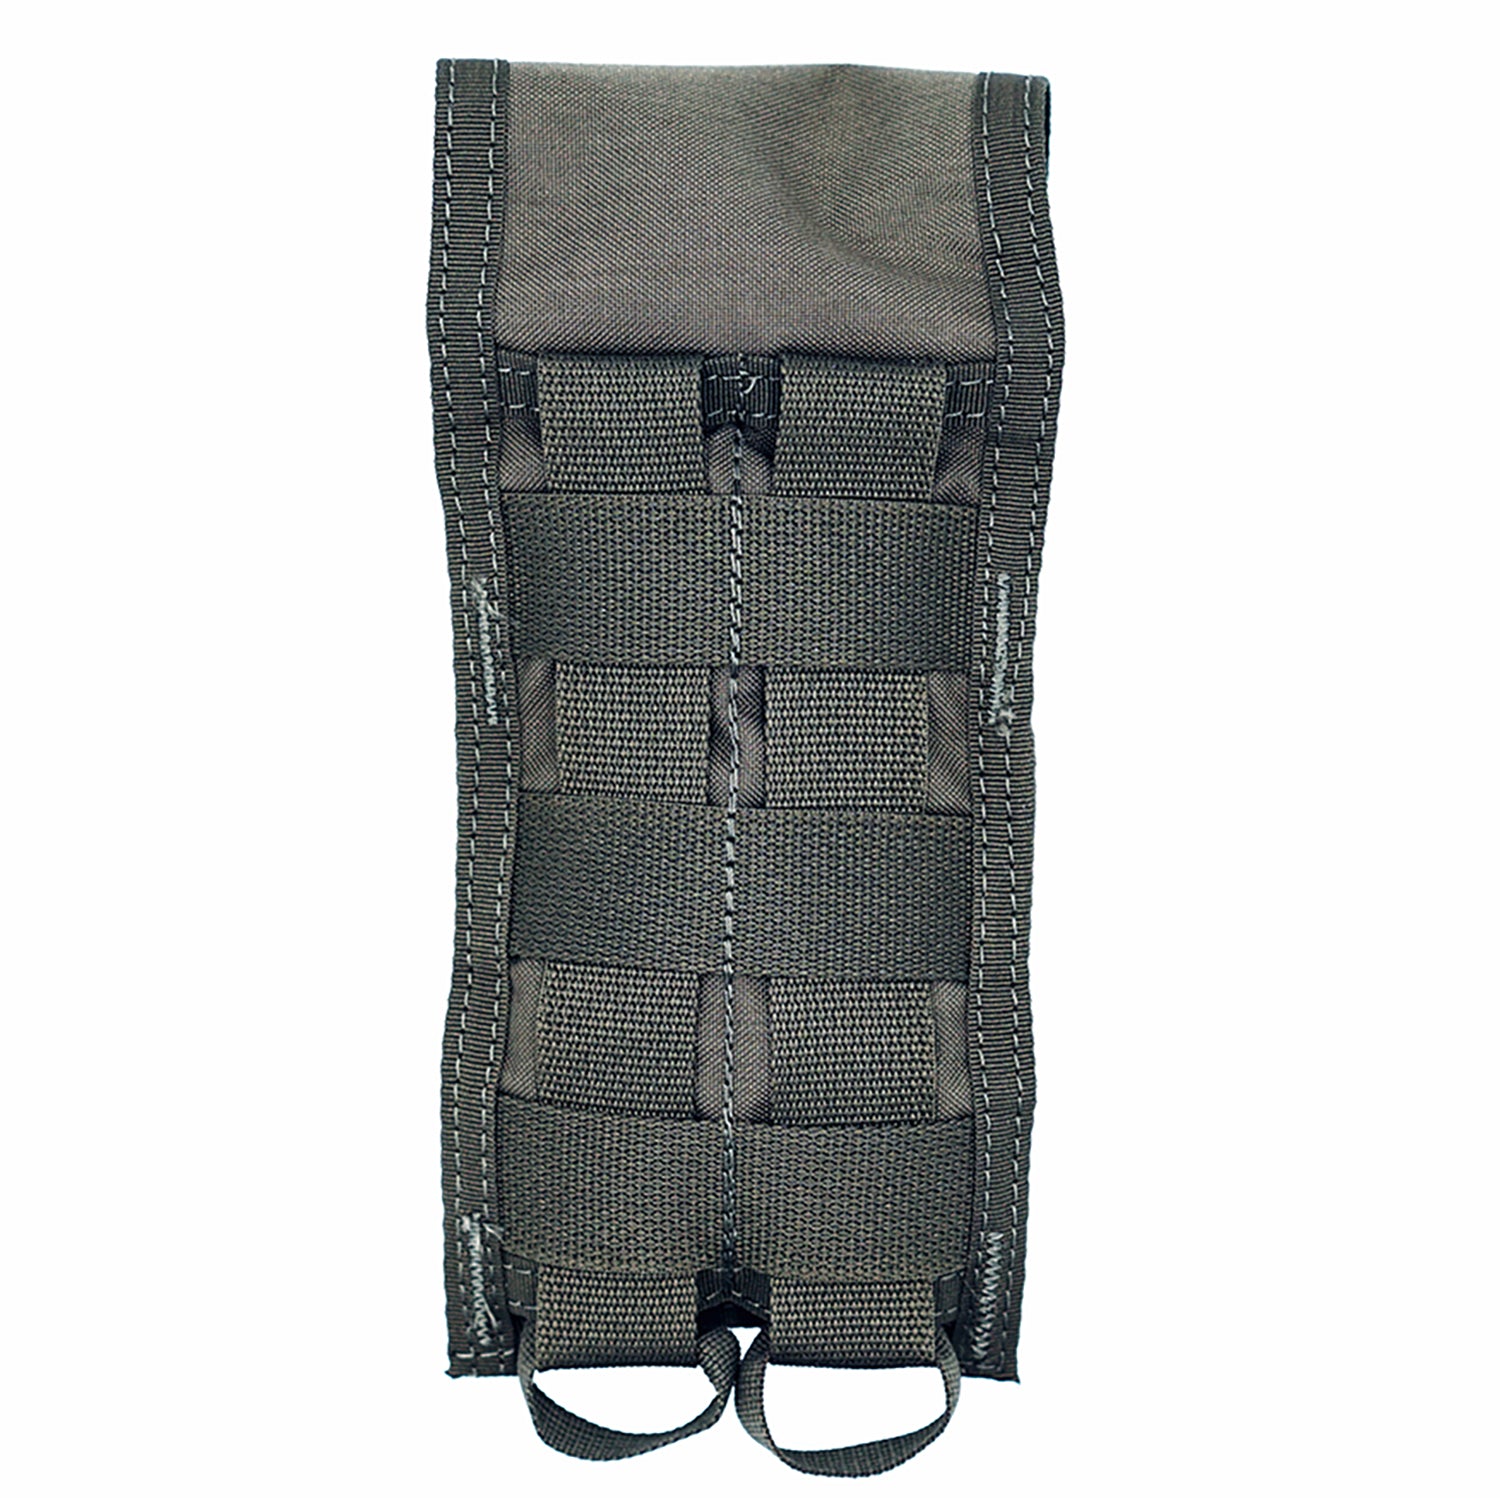 Pre MSA Paraclete Style Tiered M4 Mag Pouch - Shekkin Gears